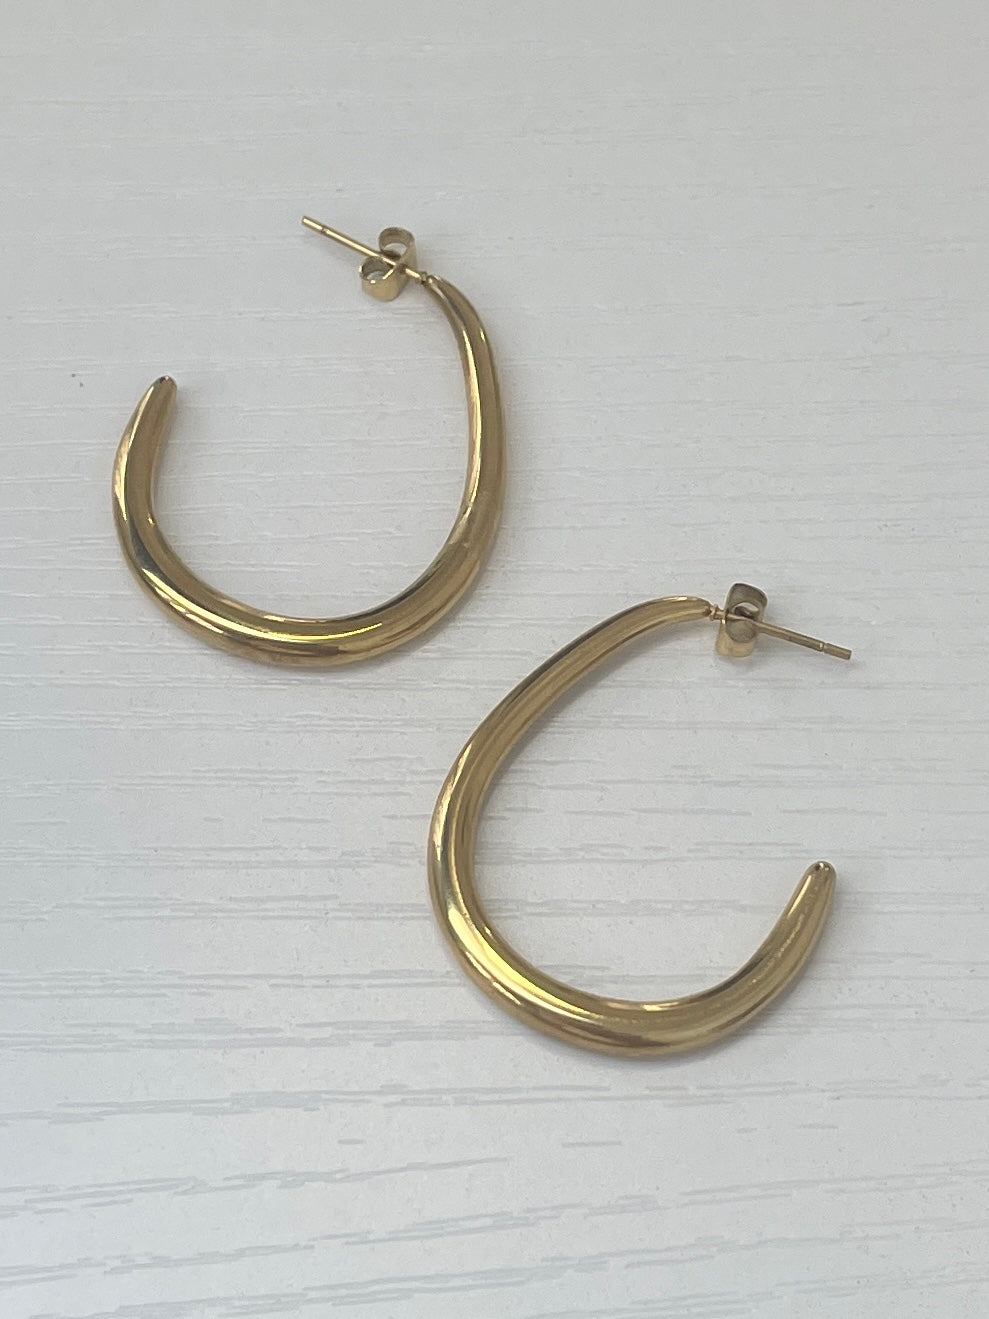 Big curved gold hoops